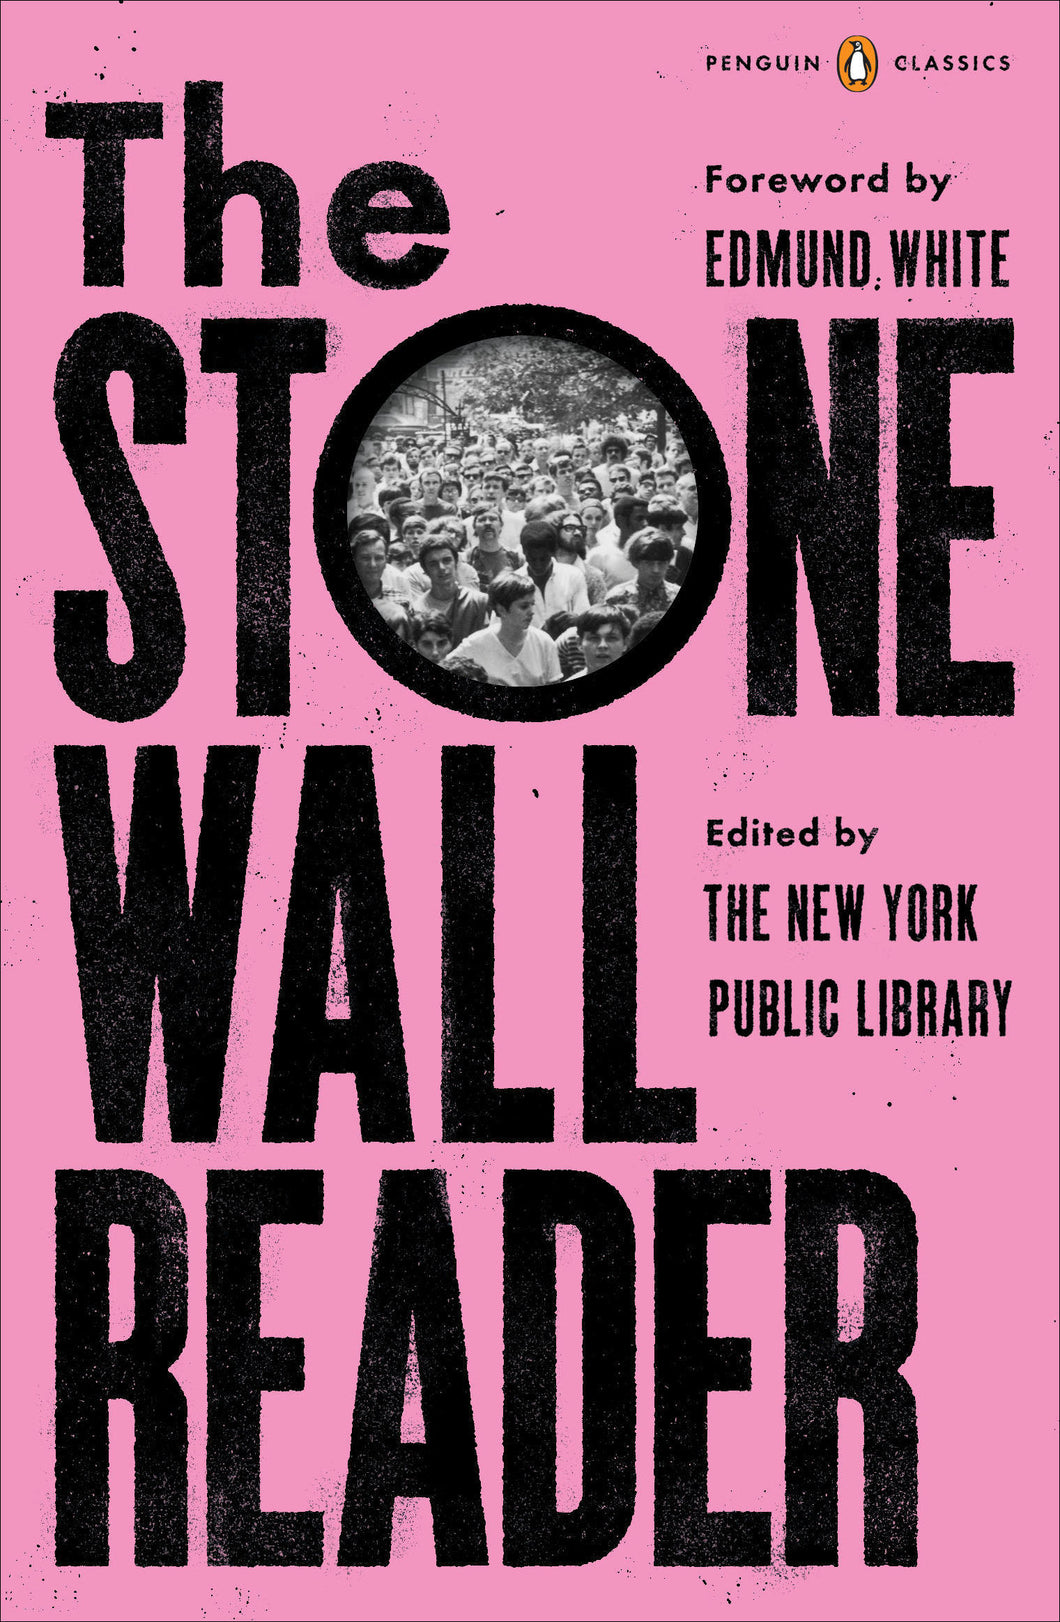 The Stonewall Reader by The New York Public Library, editors